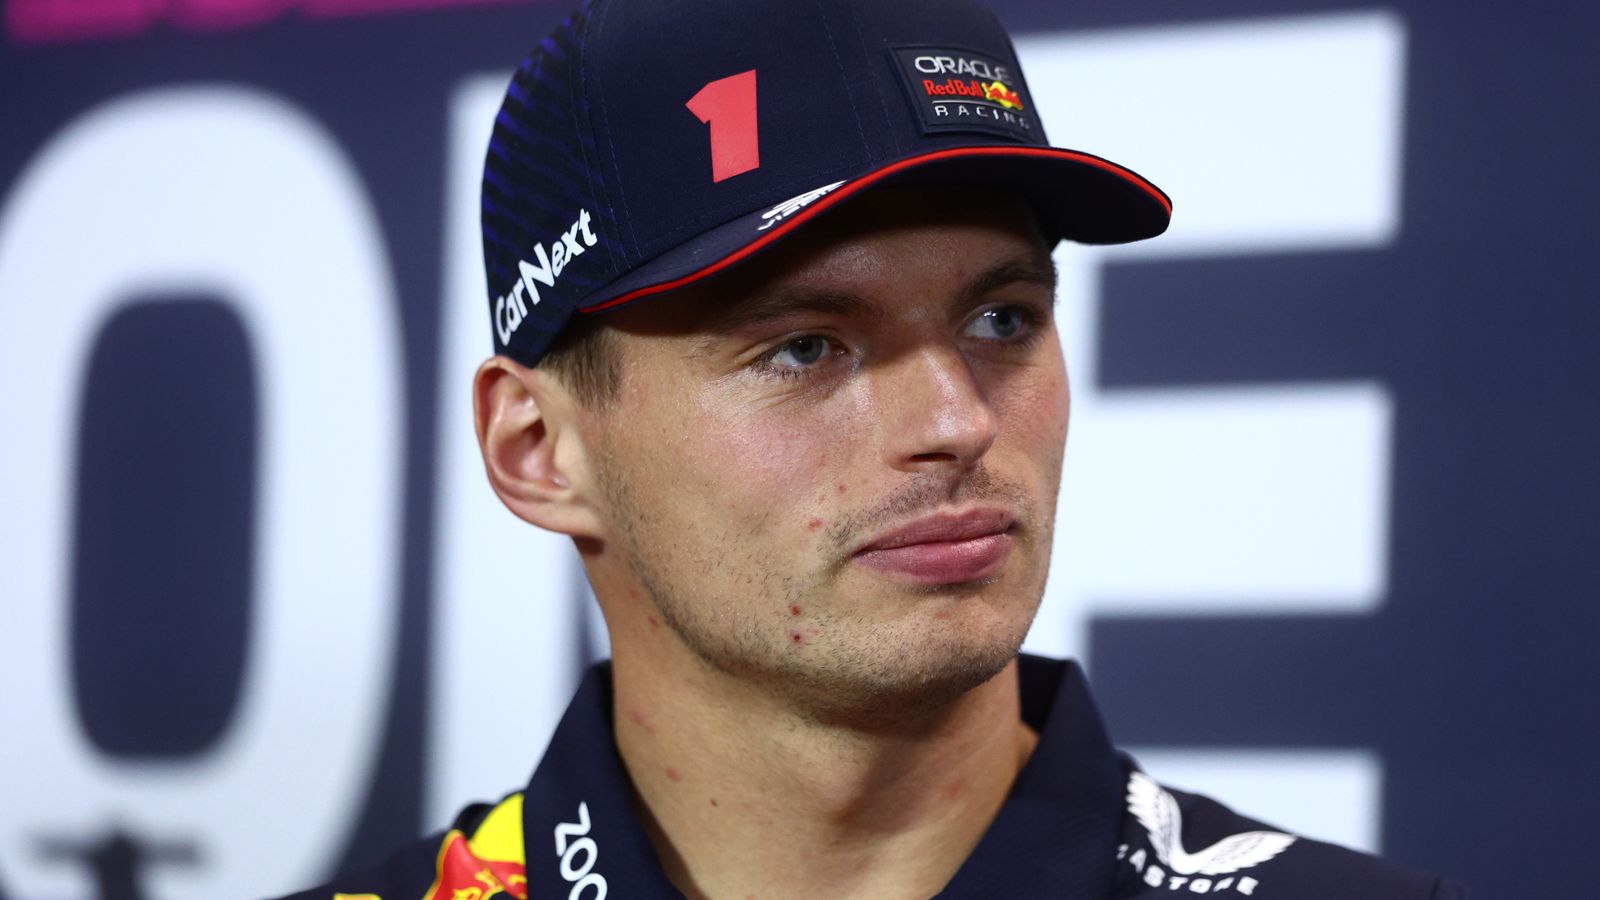 Max Verstappen criticises Toto Wolff after comments from Mercedes boss